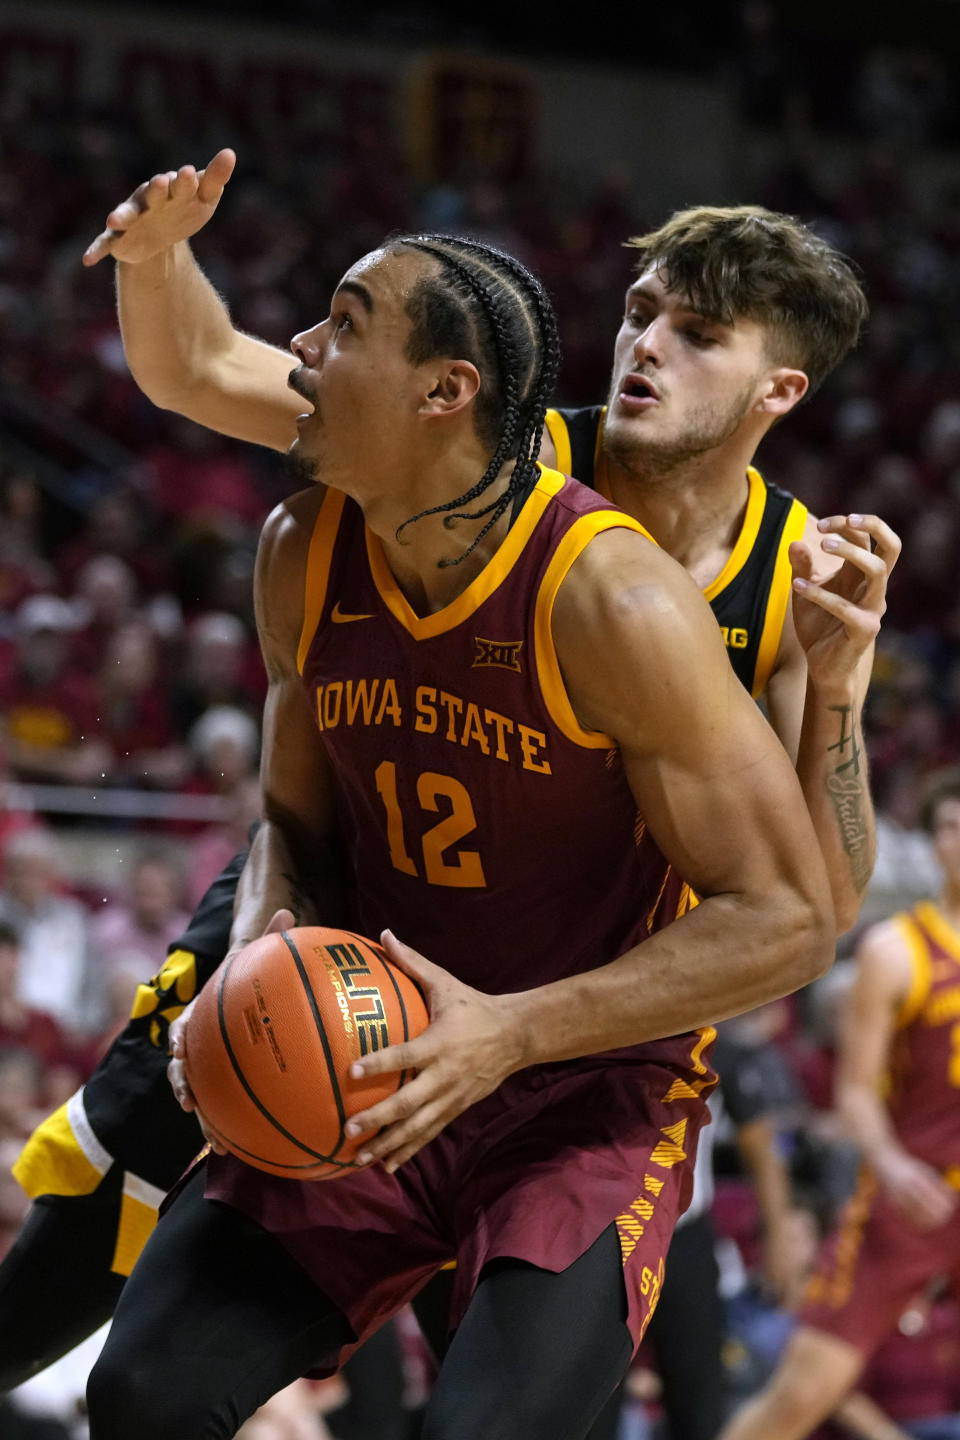 Iowa State forward Robert Jones (12) drives to the basket in front of Iowa forward Owen Freeman during the second half of an NCAA college basketball game, Thursday, Dec. 7, 2023, in Ames, Iowa. (AP Photo/Charlie Neibergall)